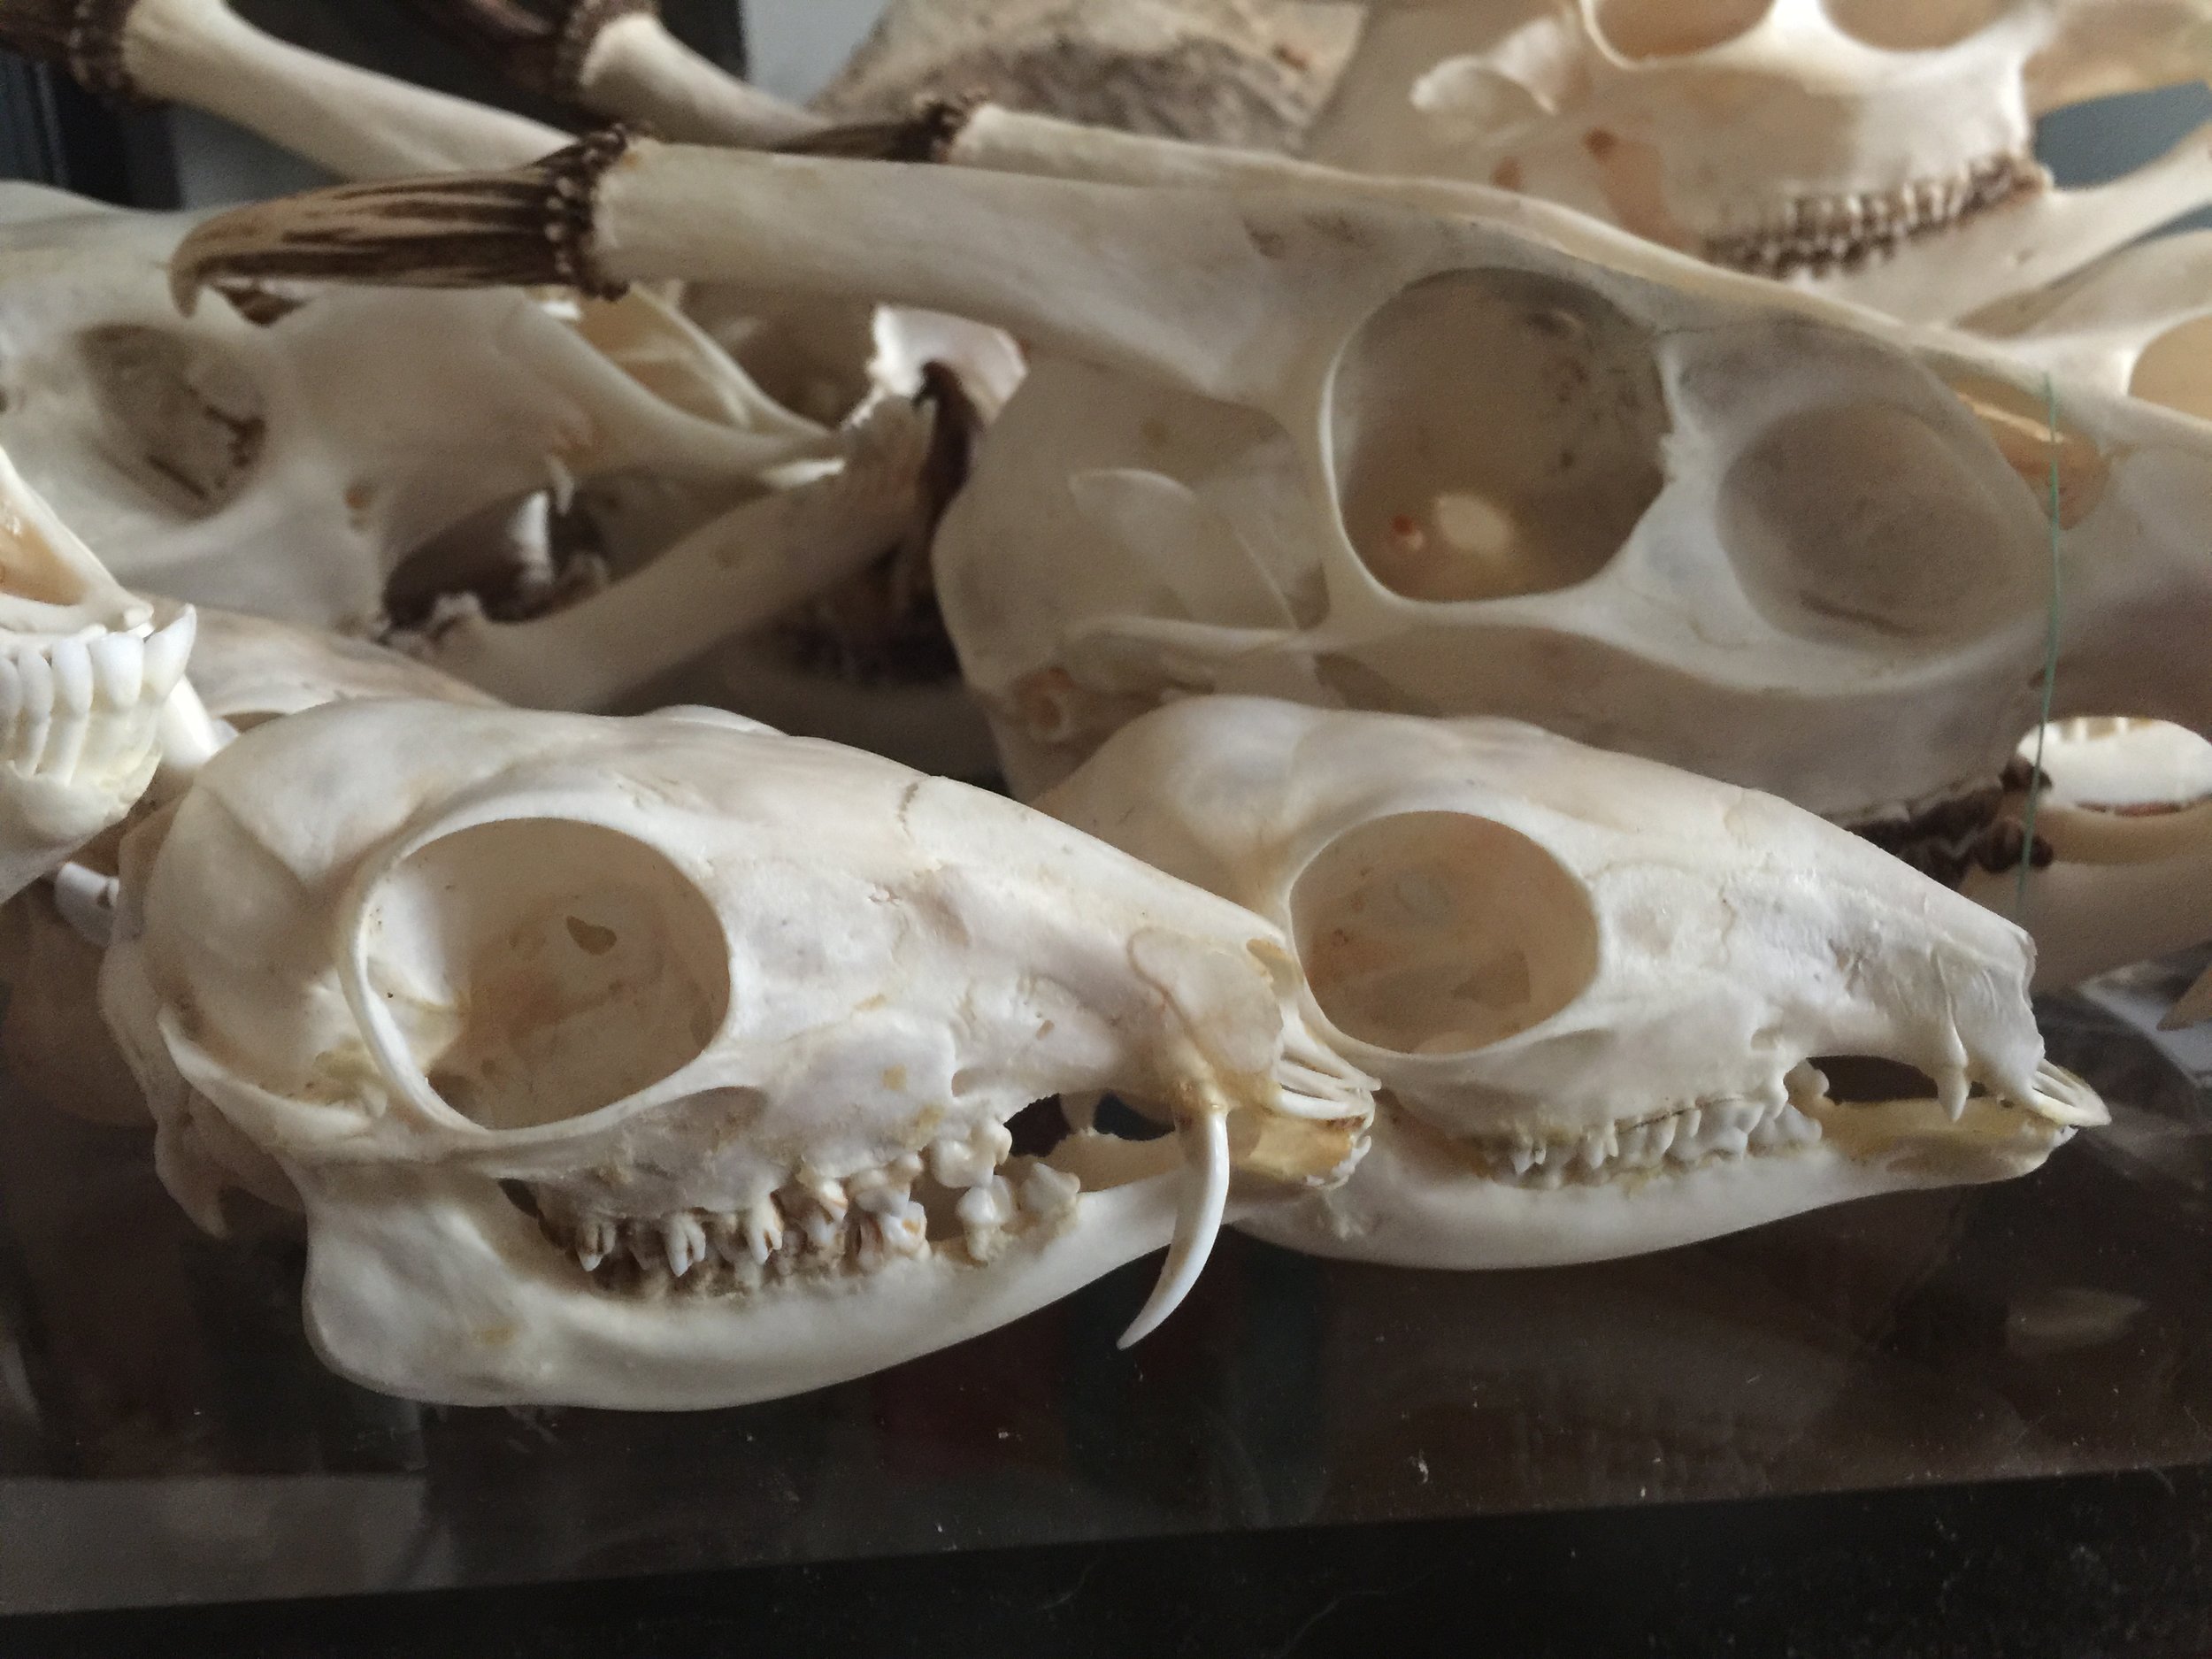 New to collecting skulls? Here is what you need to know. — Osseous Remains